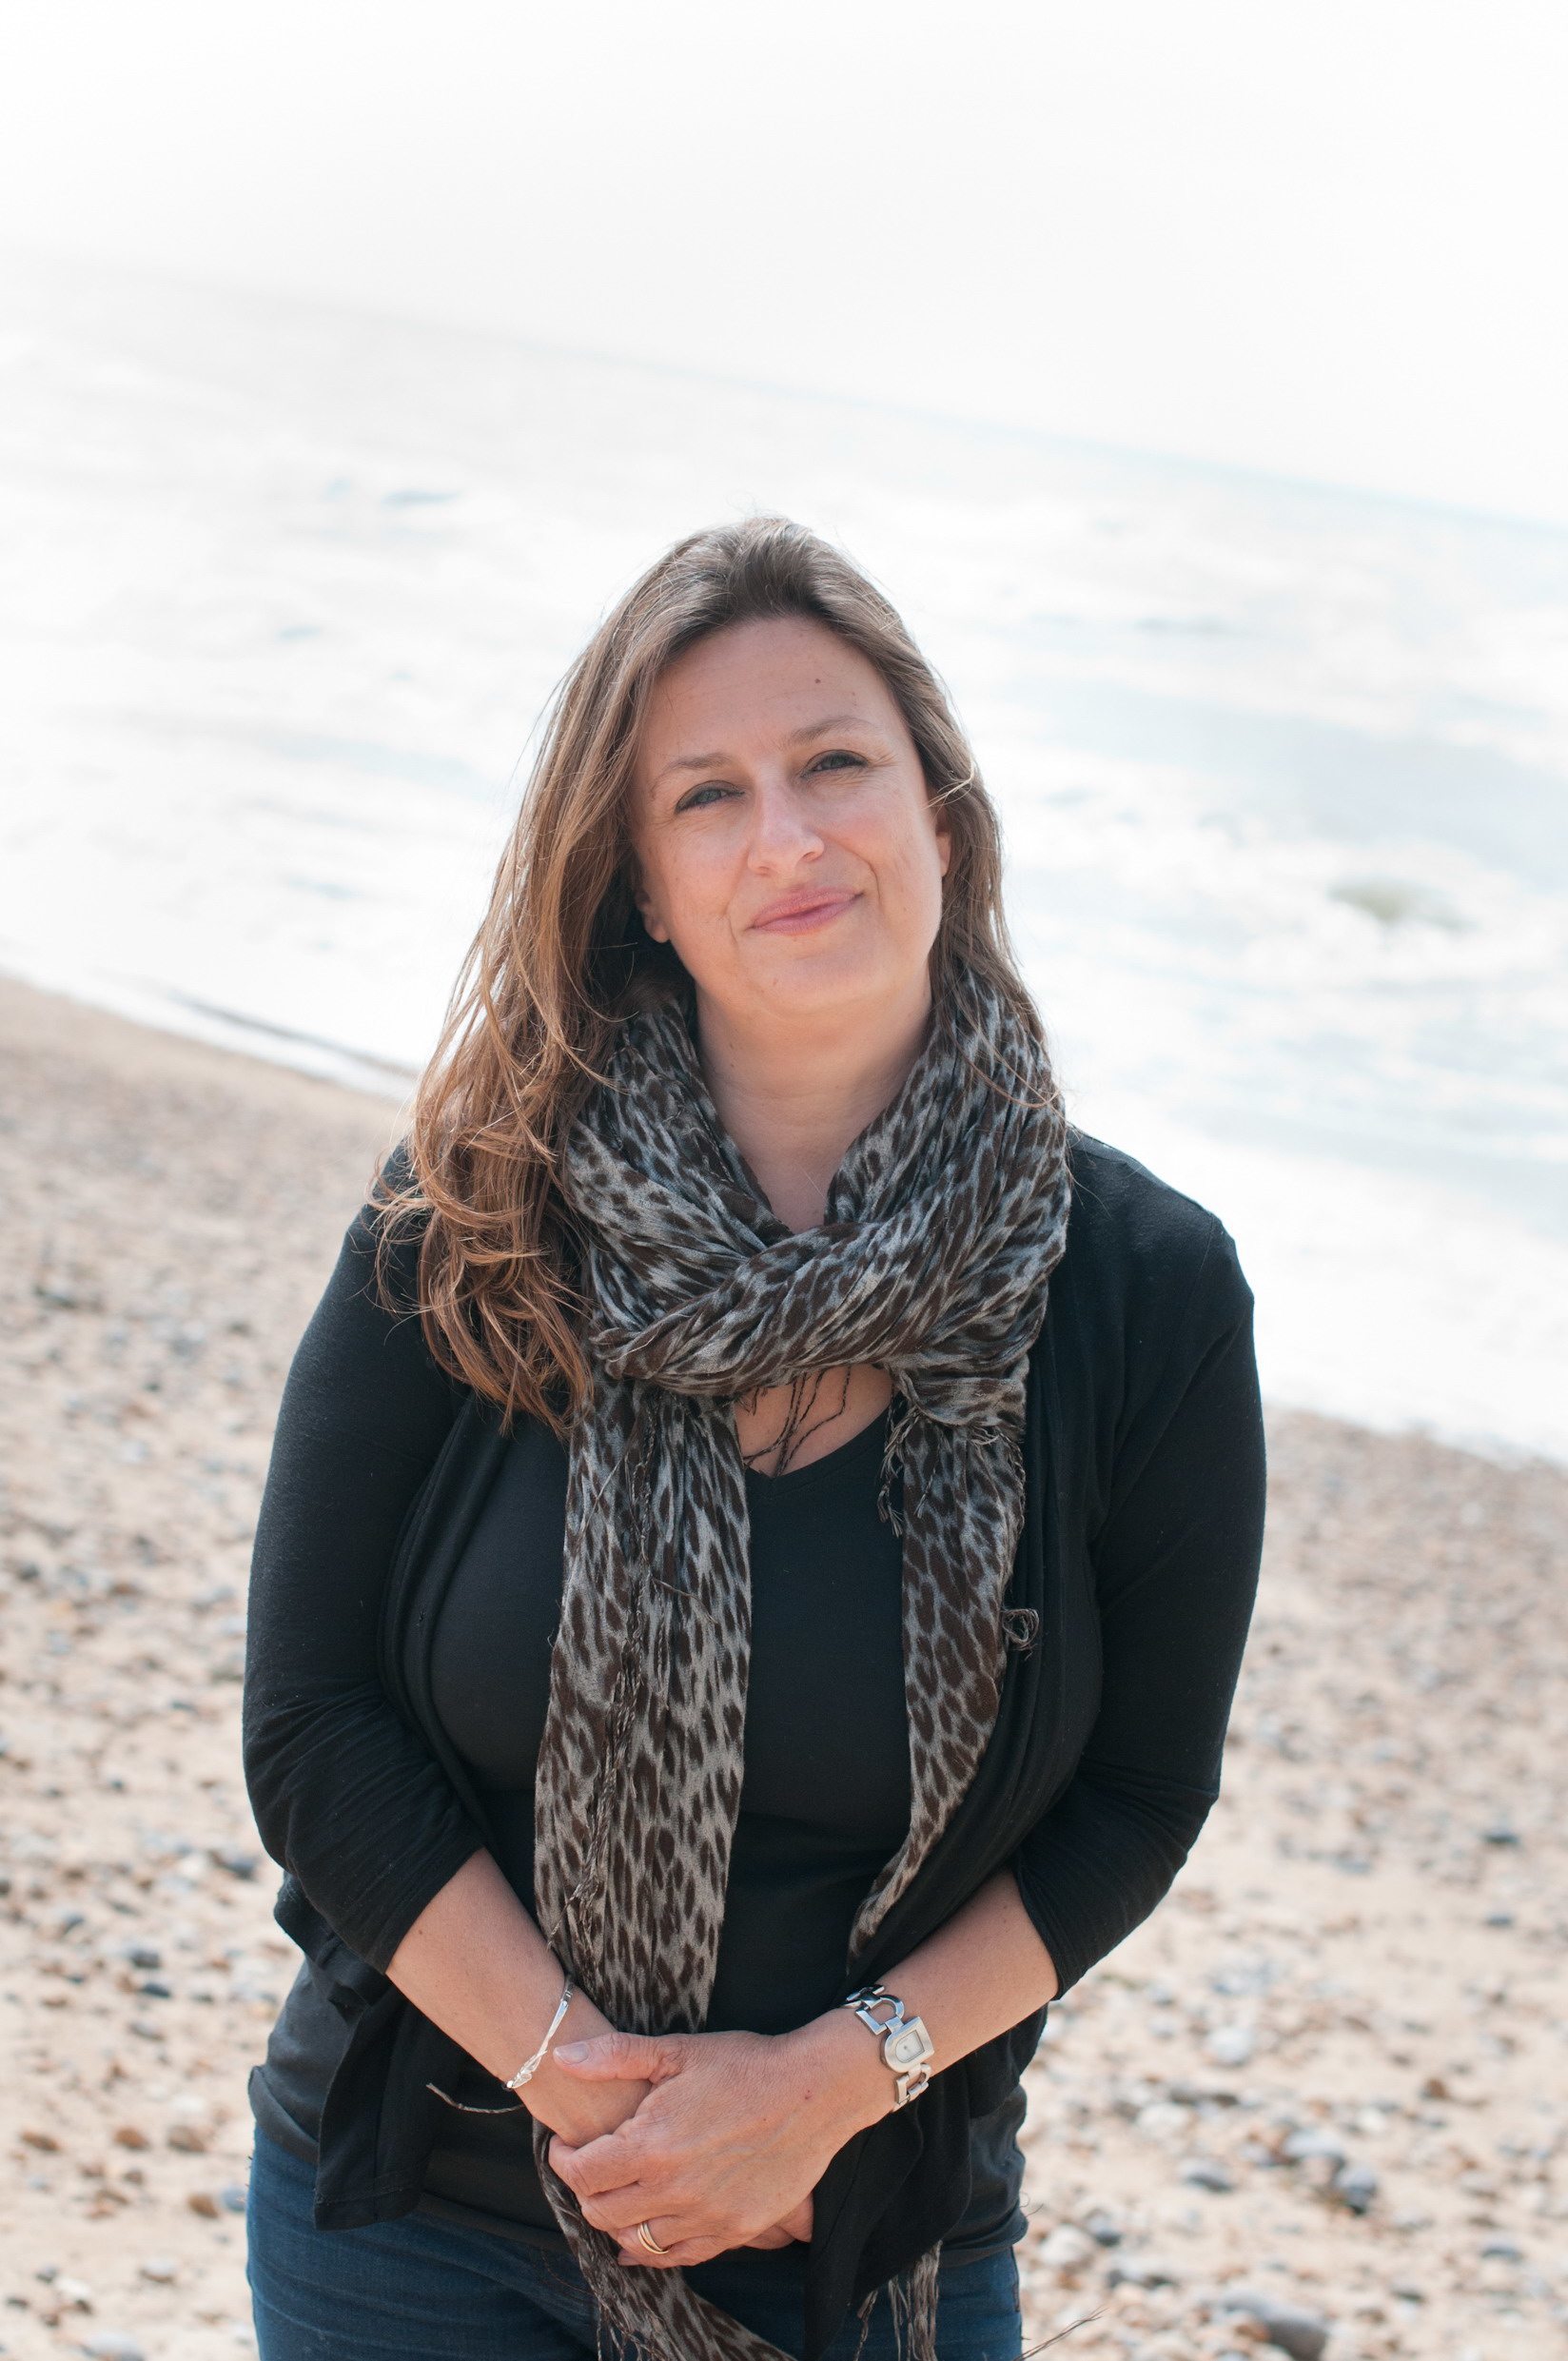 An image of the author Elly Griffiths on a beach wearing a scarf.